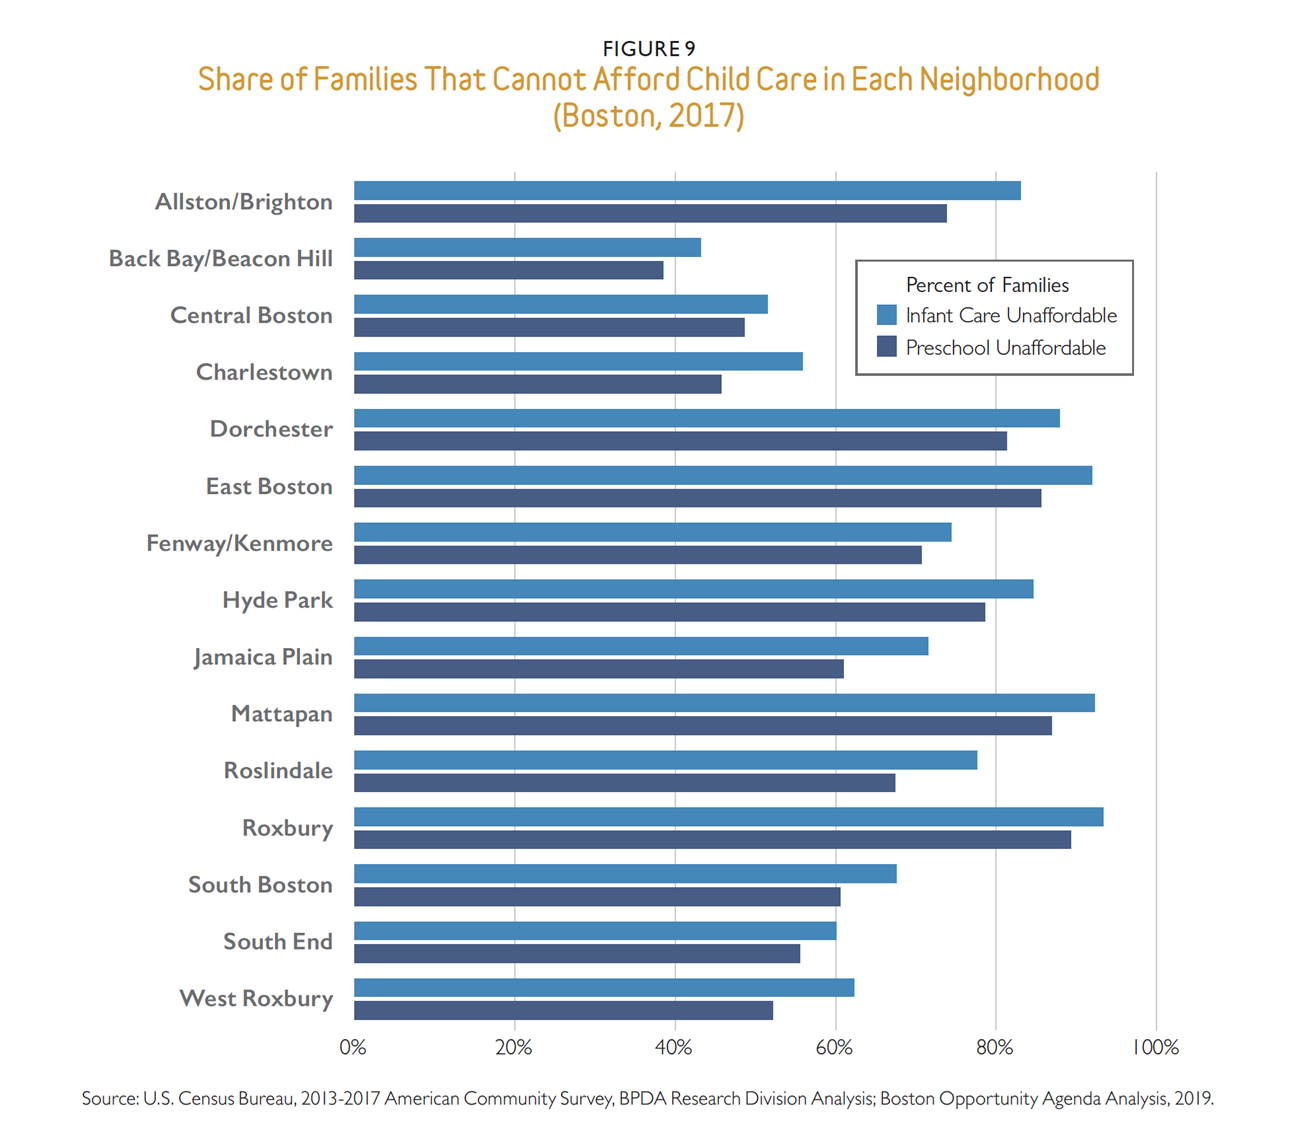 Percentage of families who cannot afford market-rate child care